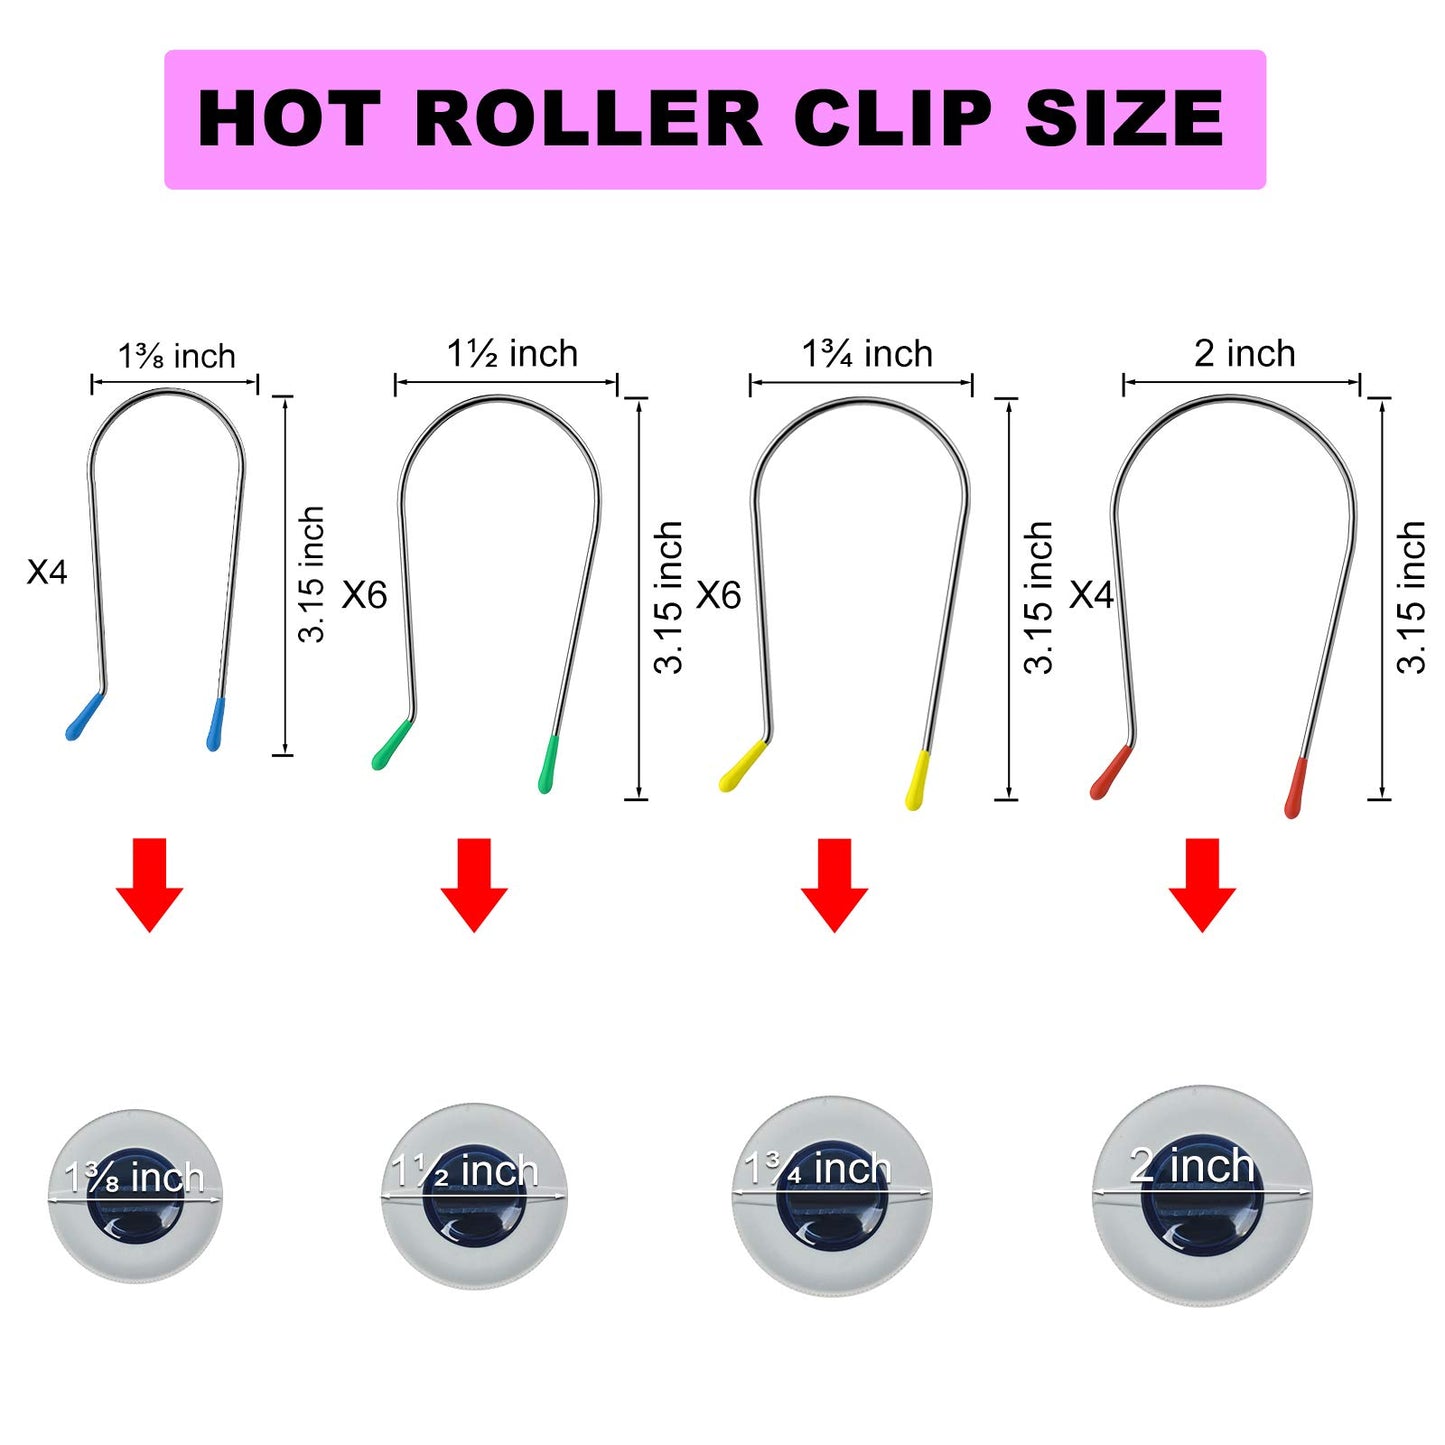 Hot Curler Clips Replacement Hot Roller Clips Rollers Securing Pins Fits 1¾ inch Hot Rollers Curlers